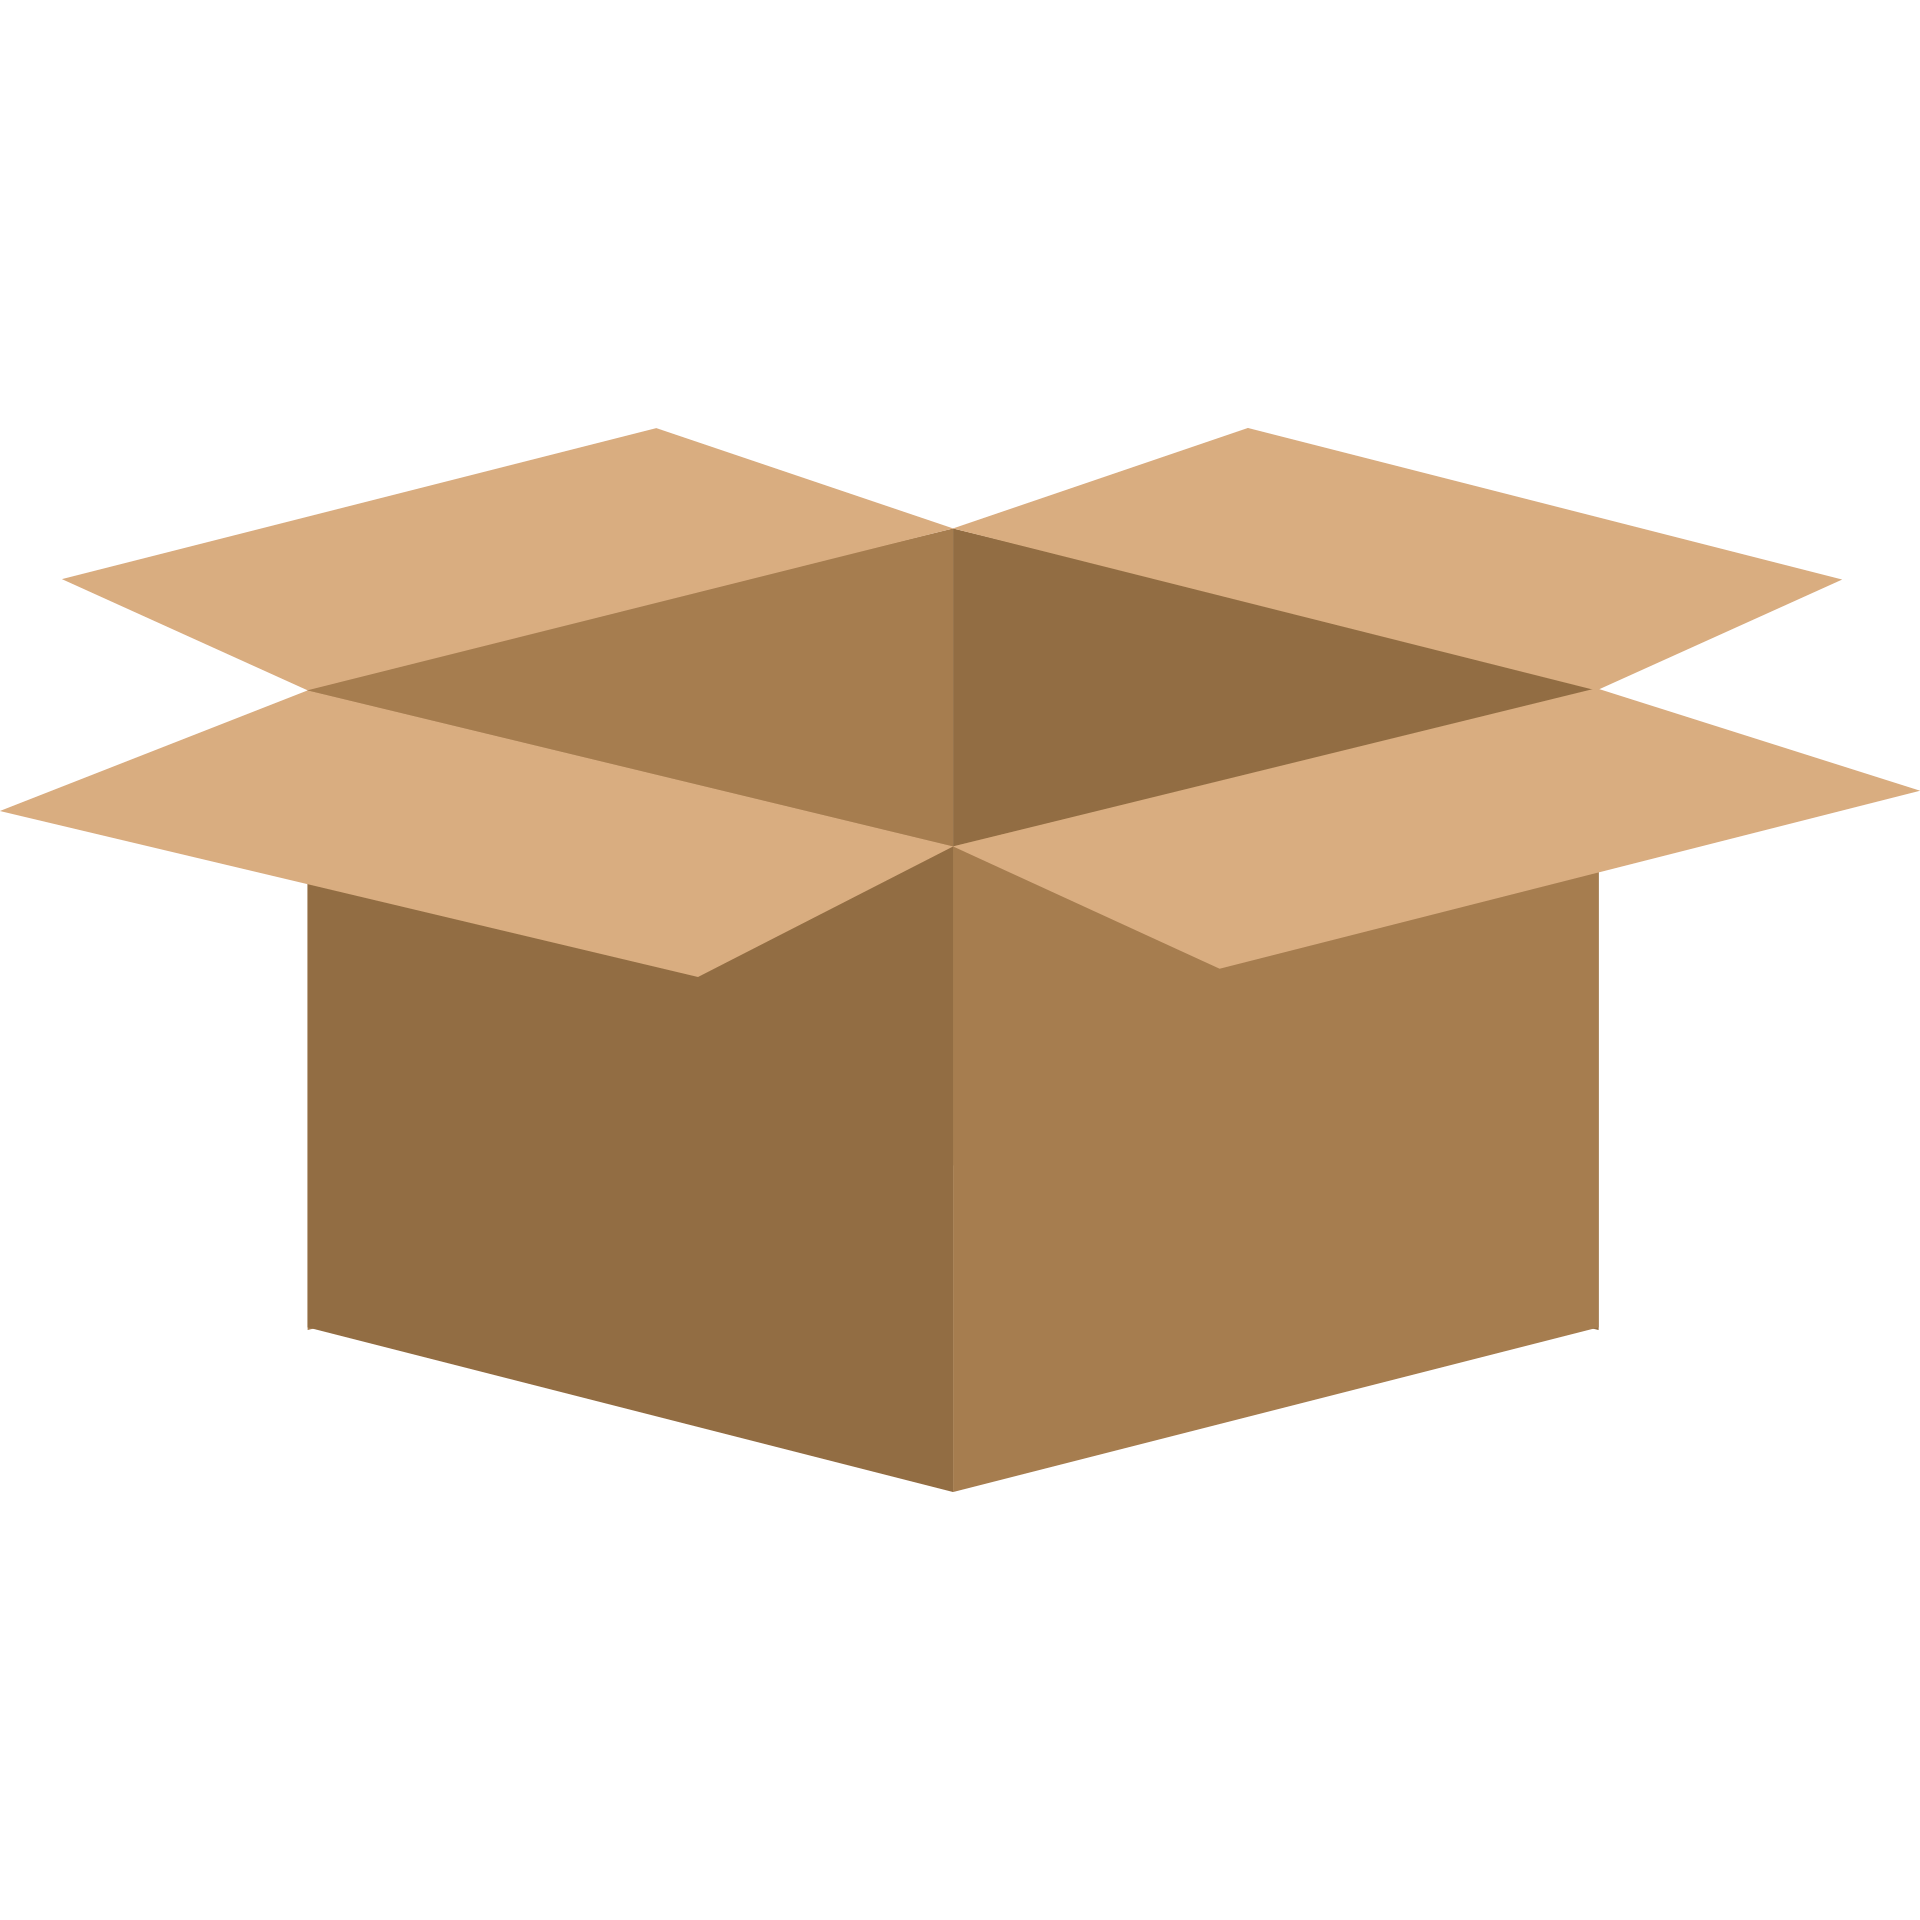 Box Shipping Sticker by Lash eXtend for iOS & Android | GIPHY